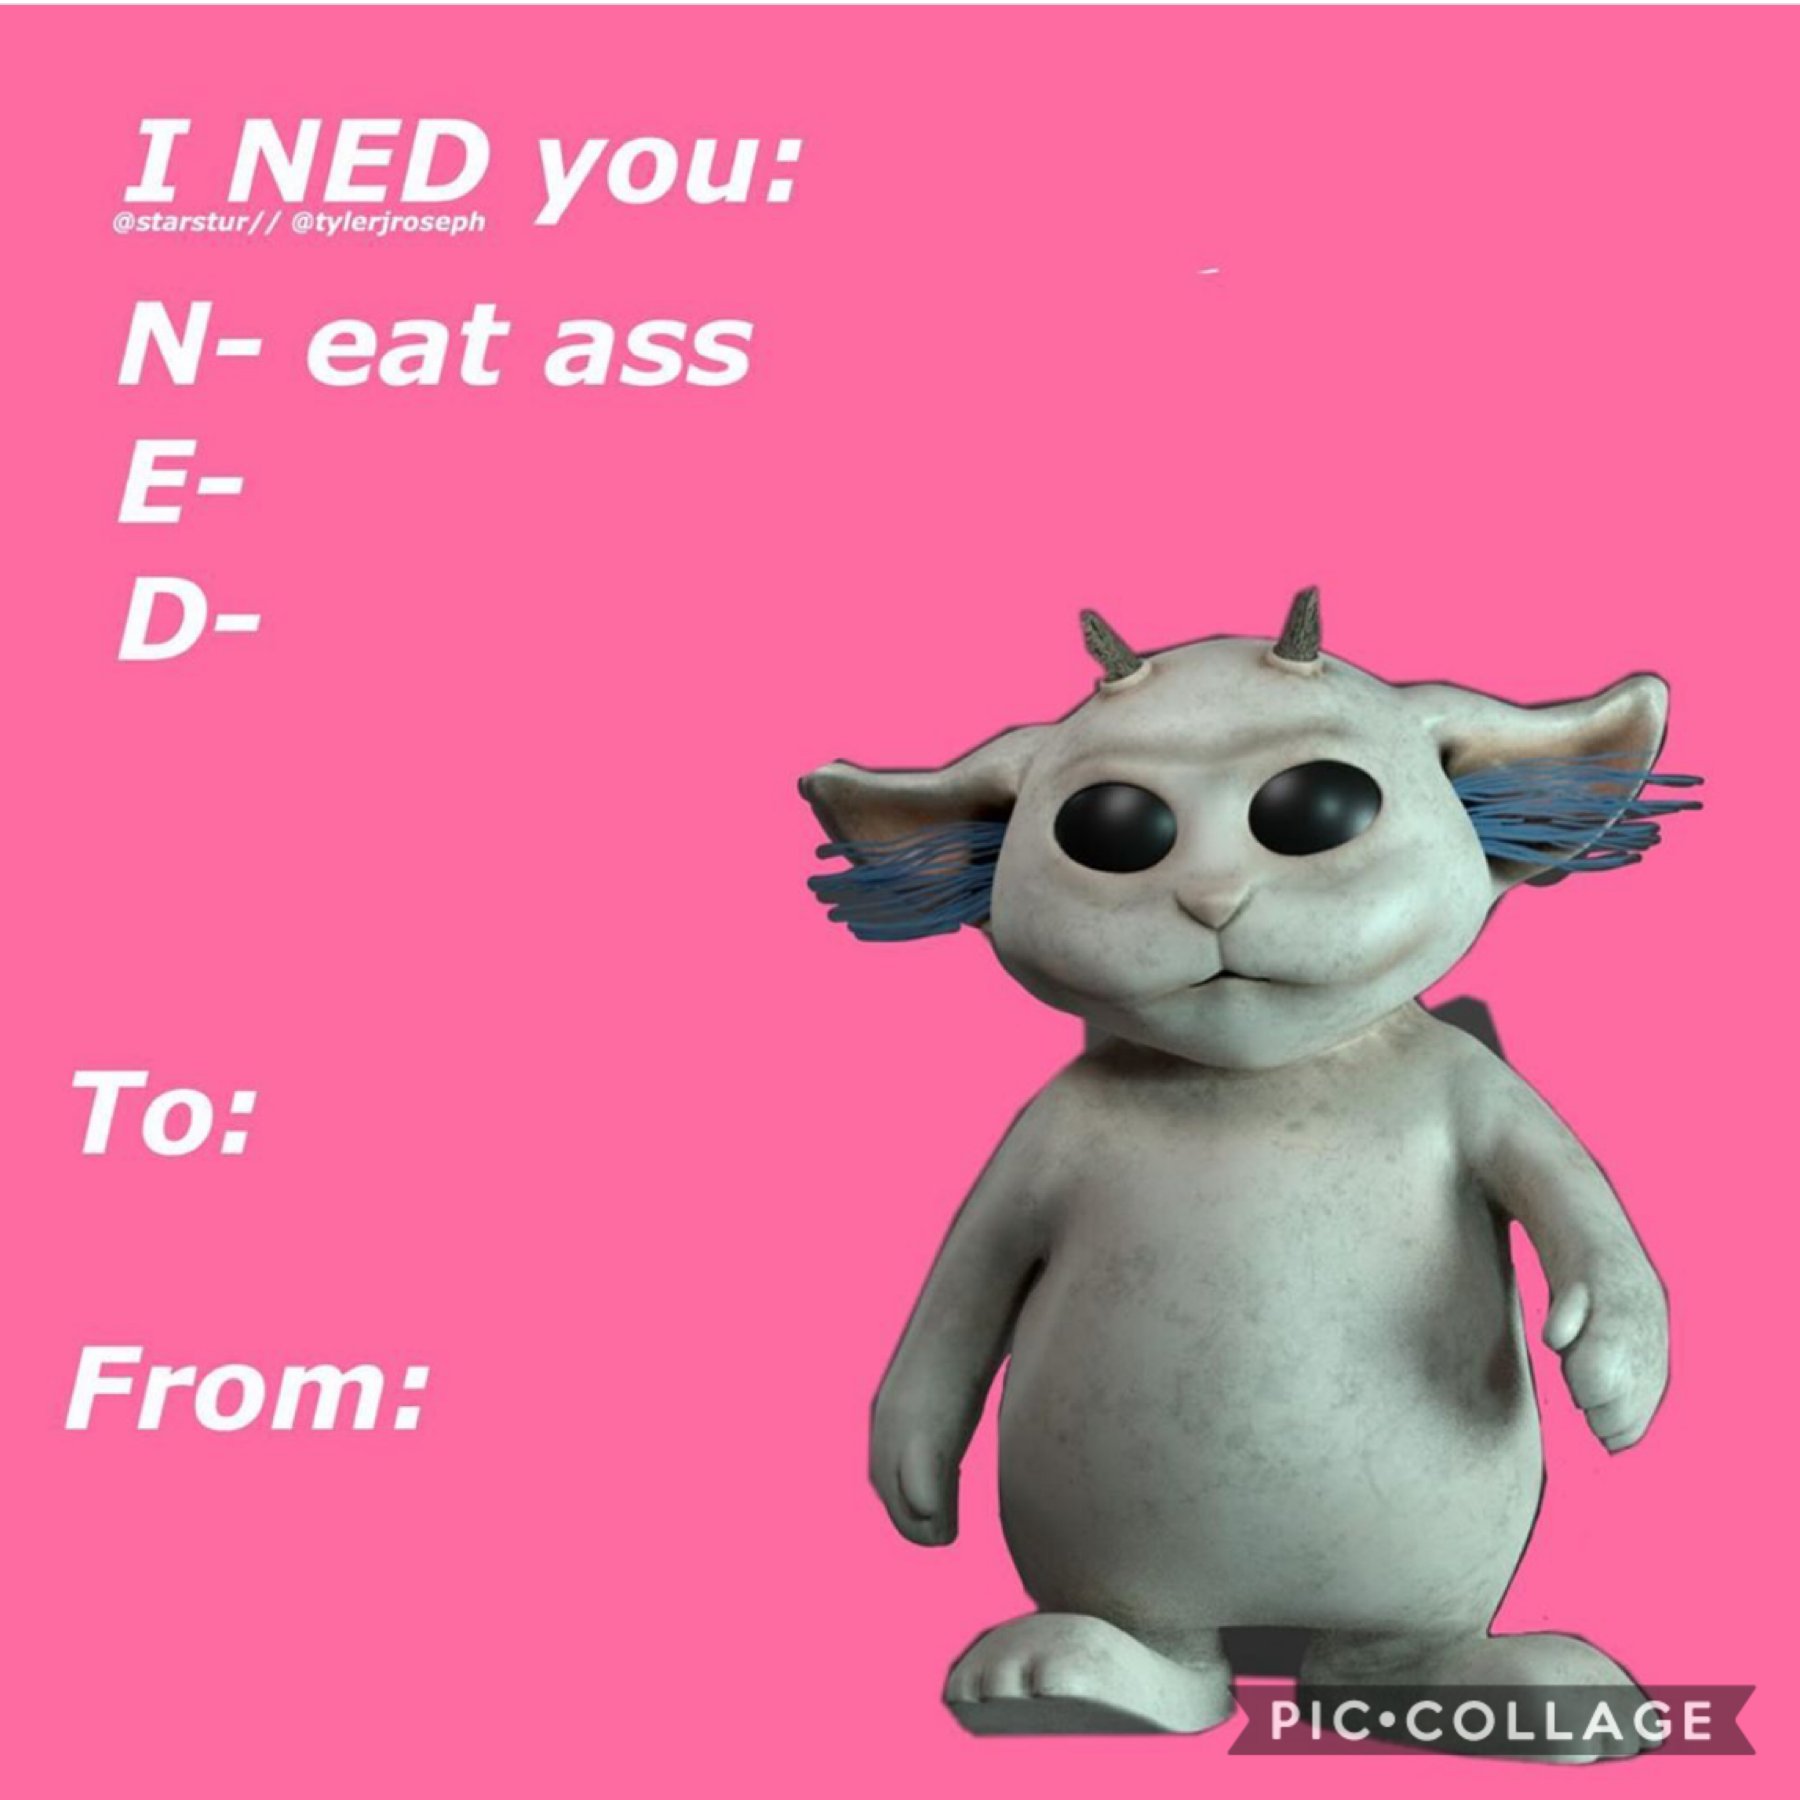 Perfect valentines card for you 